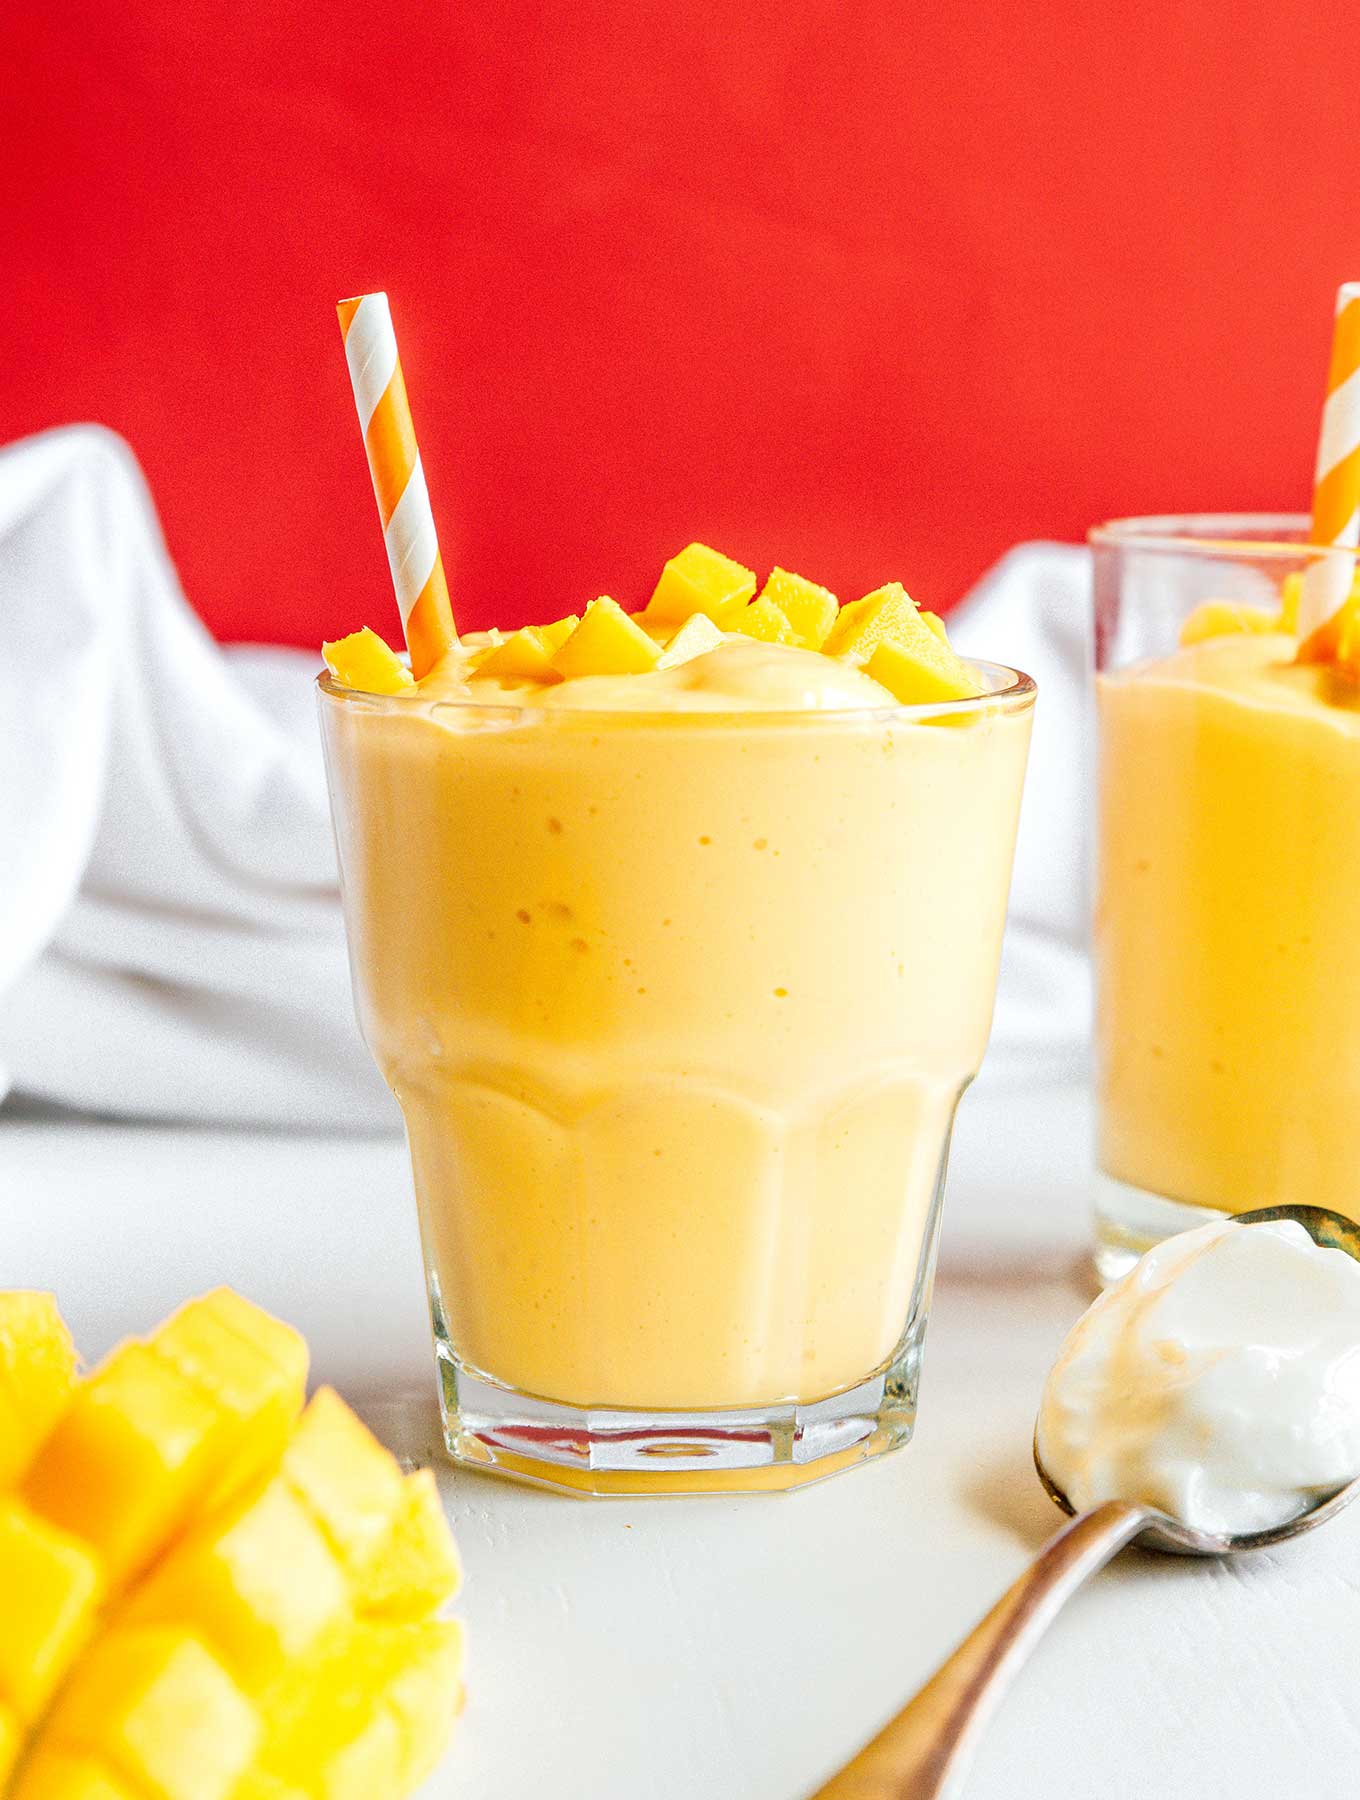 How To Make A Mango Smoothie With Frozen Mangoes? 